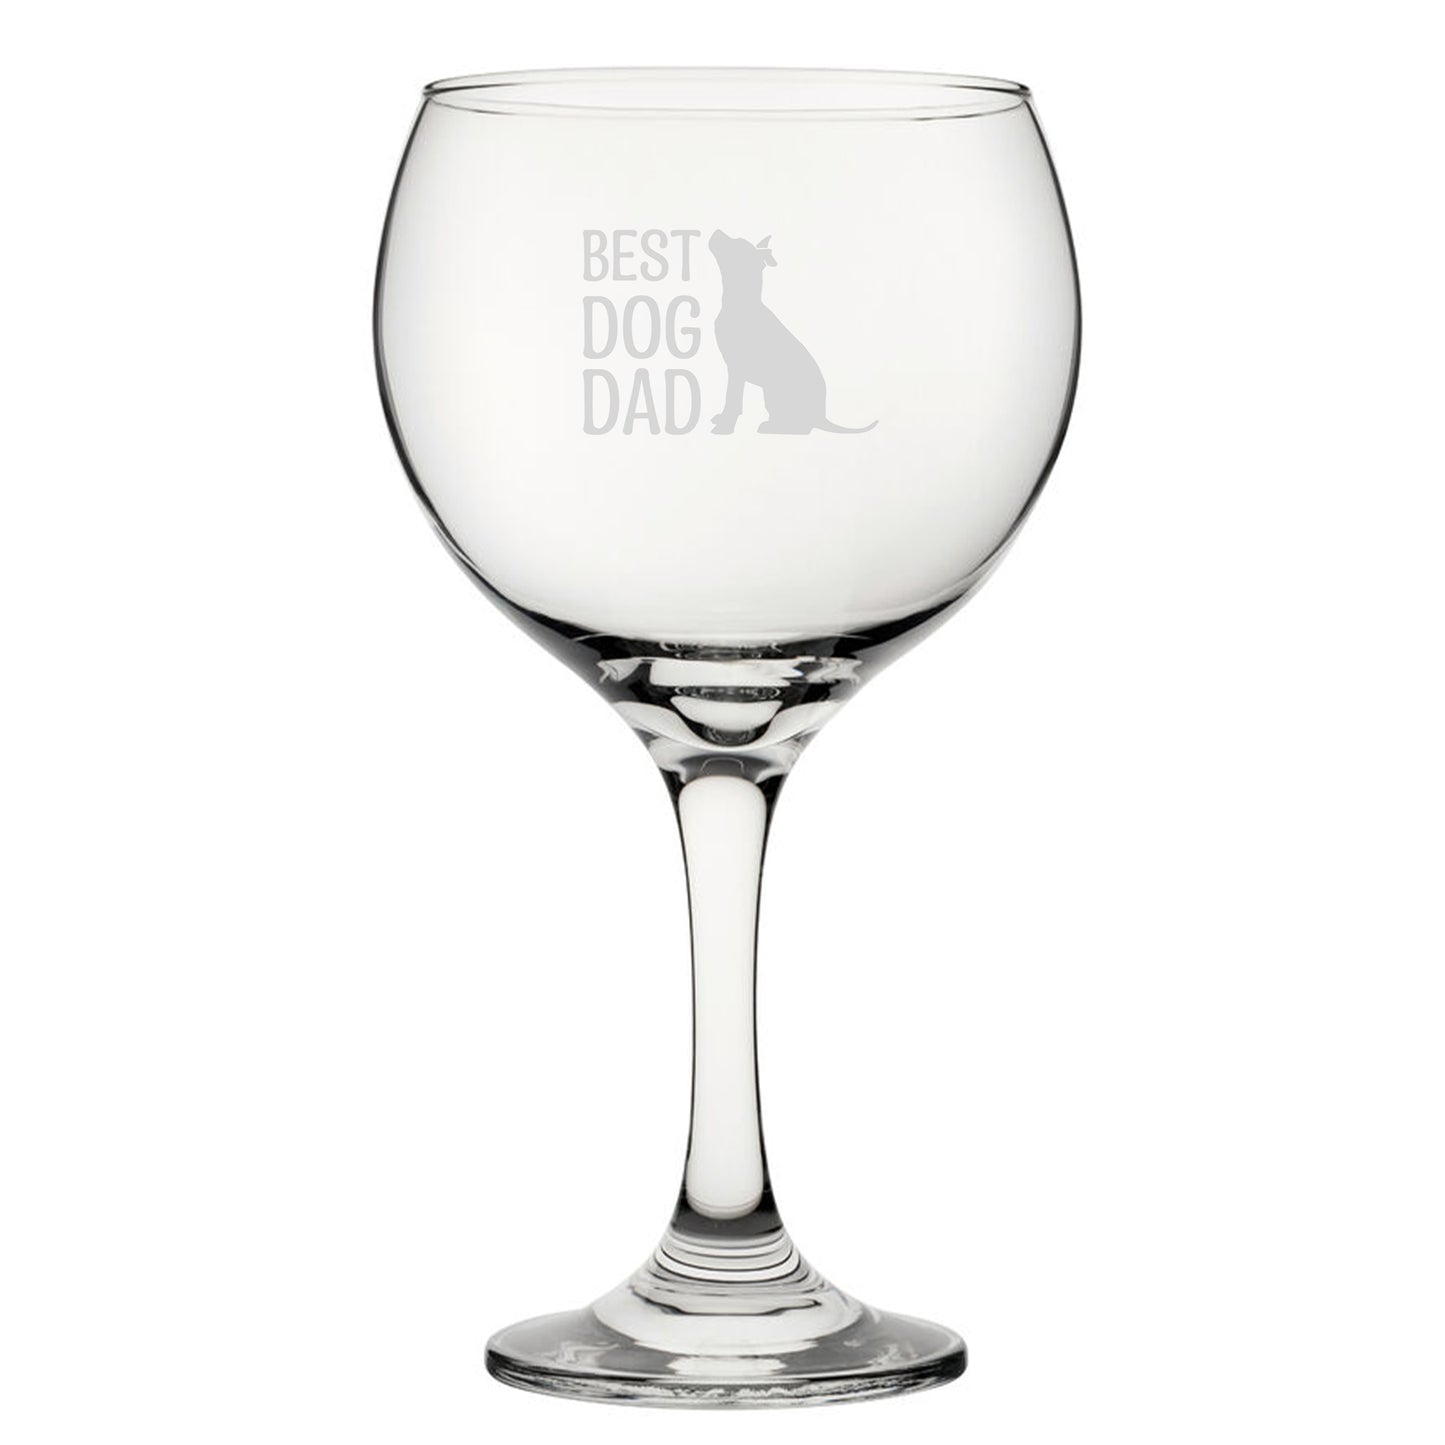 Best Dog Dad - Engraved Novelty Gin Balloon Cocktail Glass Image 1